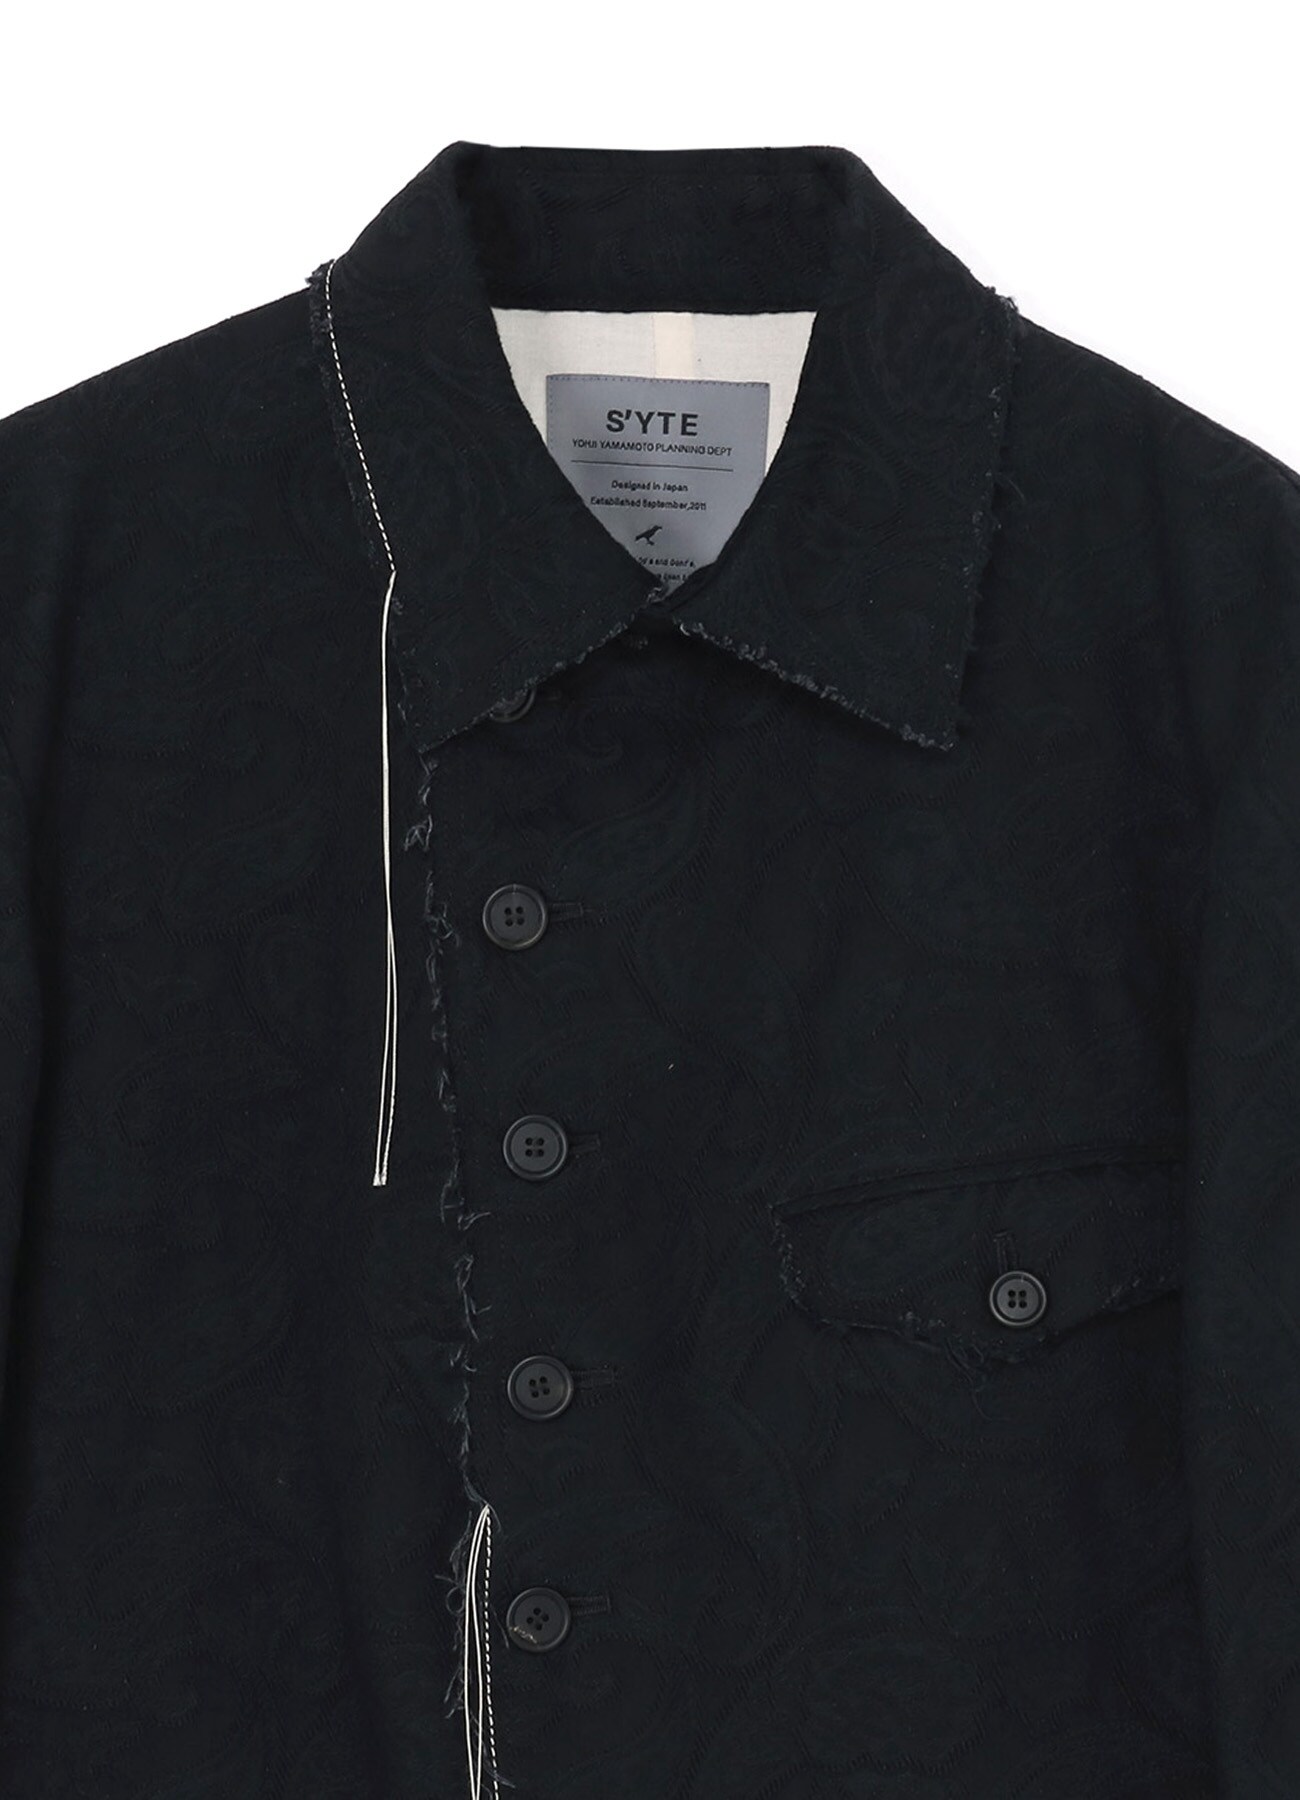 PAISLEY PATTERN JACQUARD CUT-OUT DESIGN SEMI-DOUBLE-BREASTED JACKET